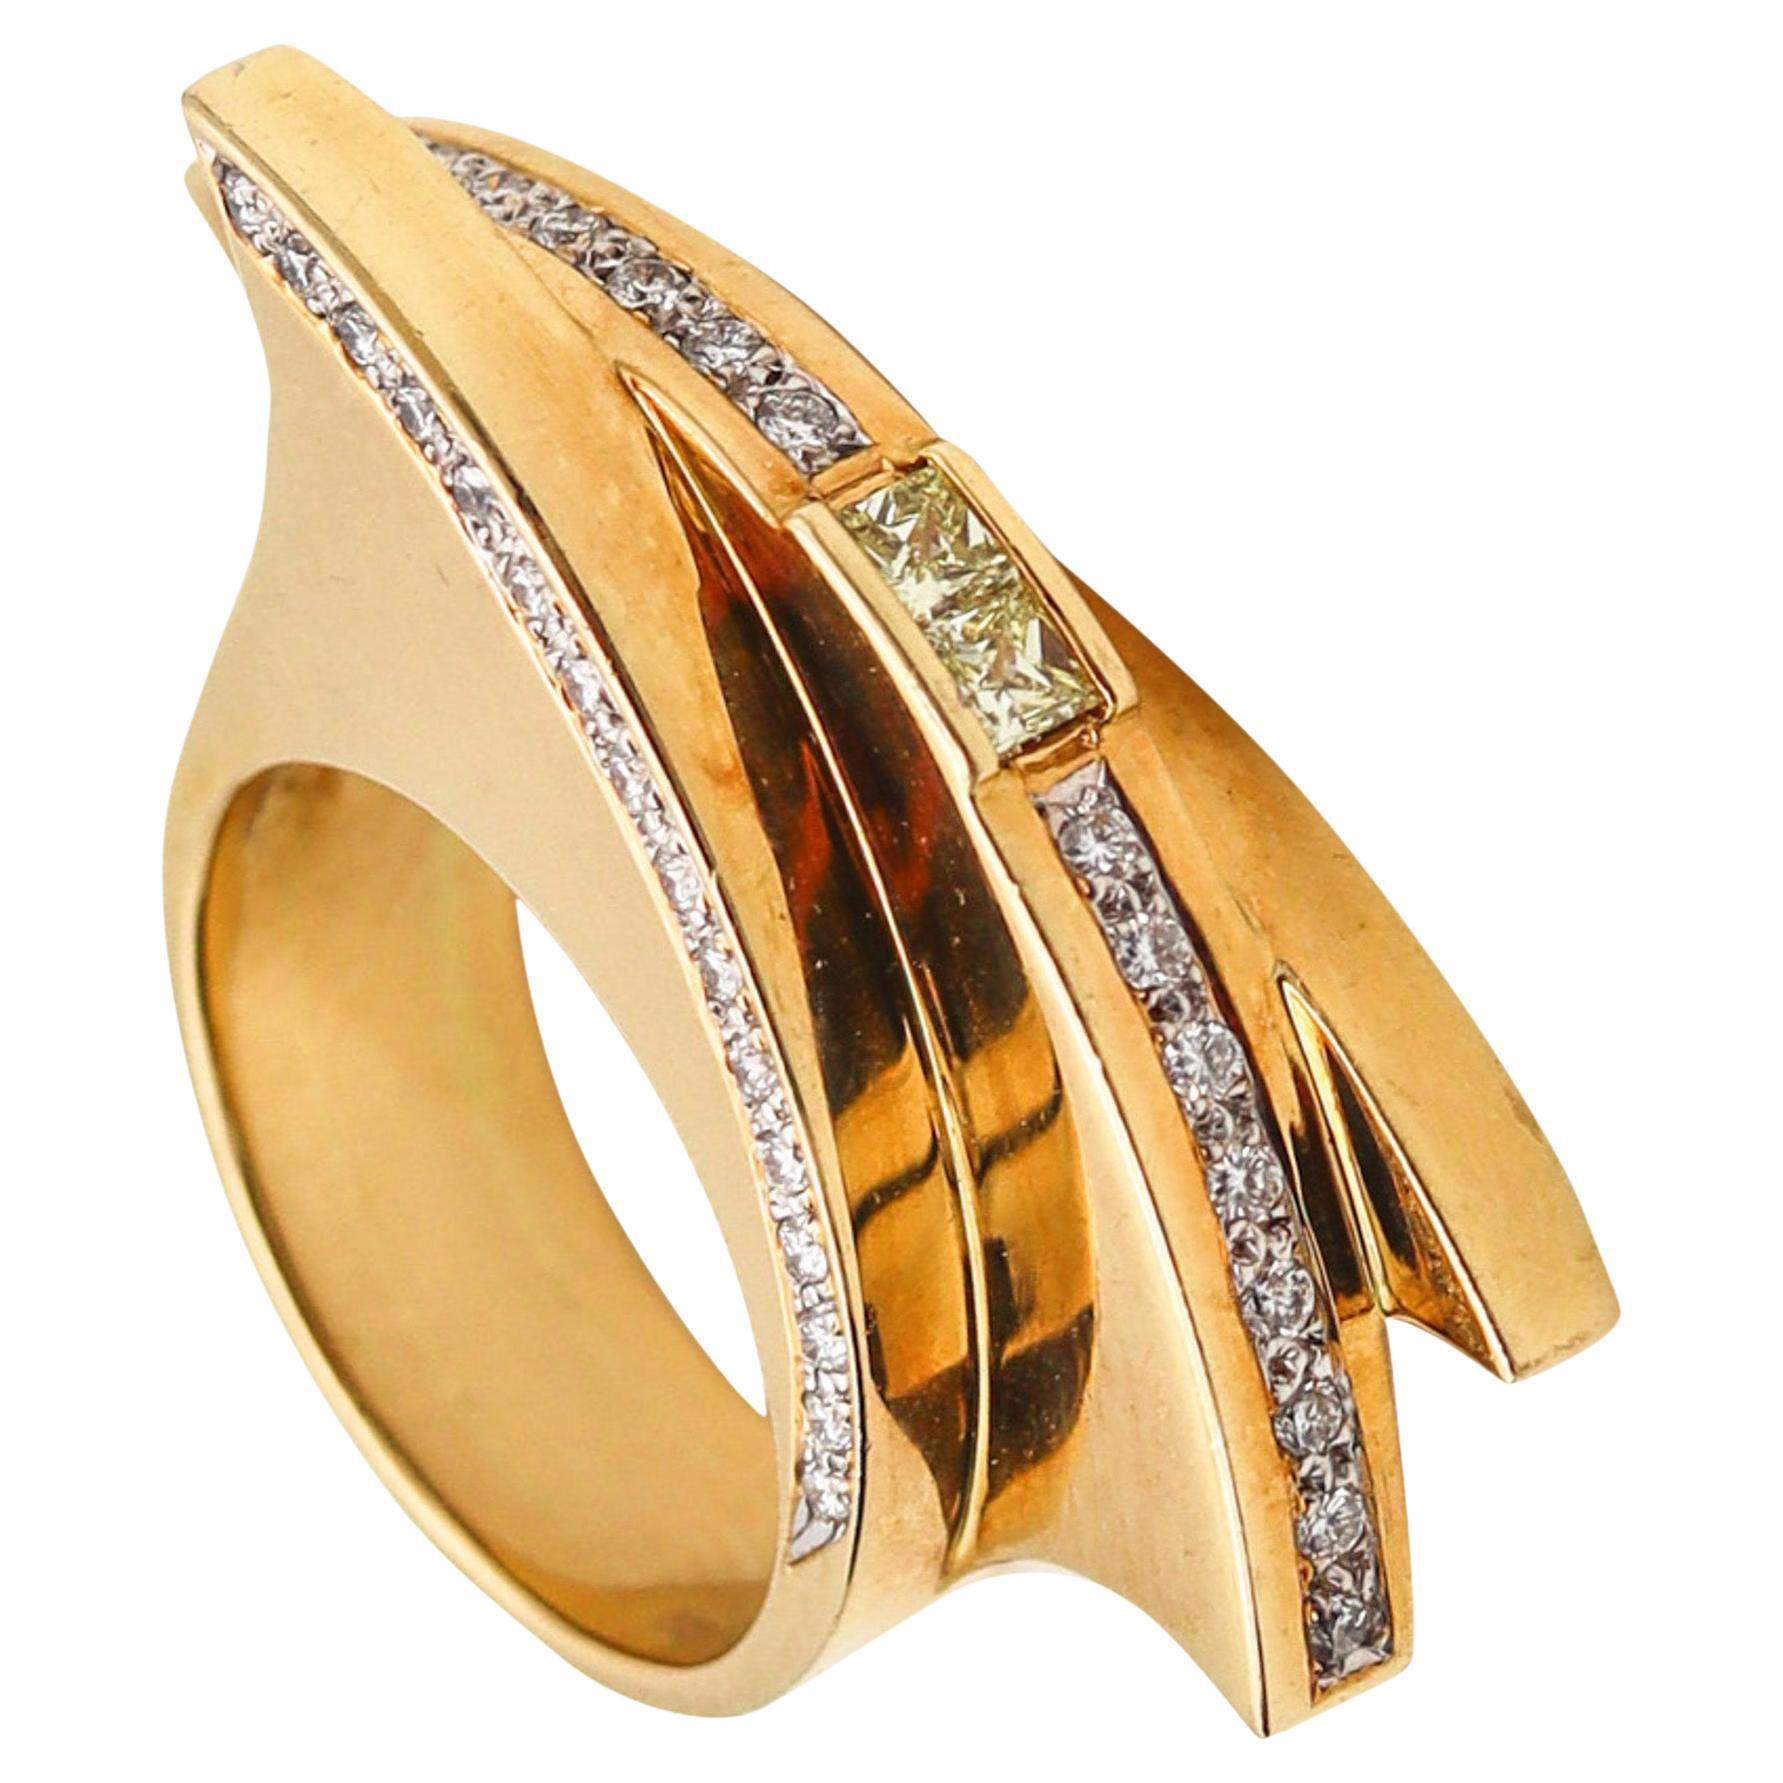 Studio Designer Geometric Sculptural Ring In 18Kt Gold With 1.62 Ctw Diamonds For Sale